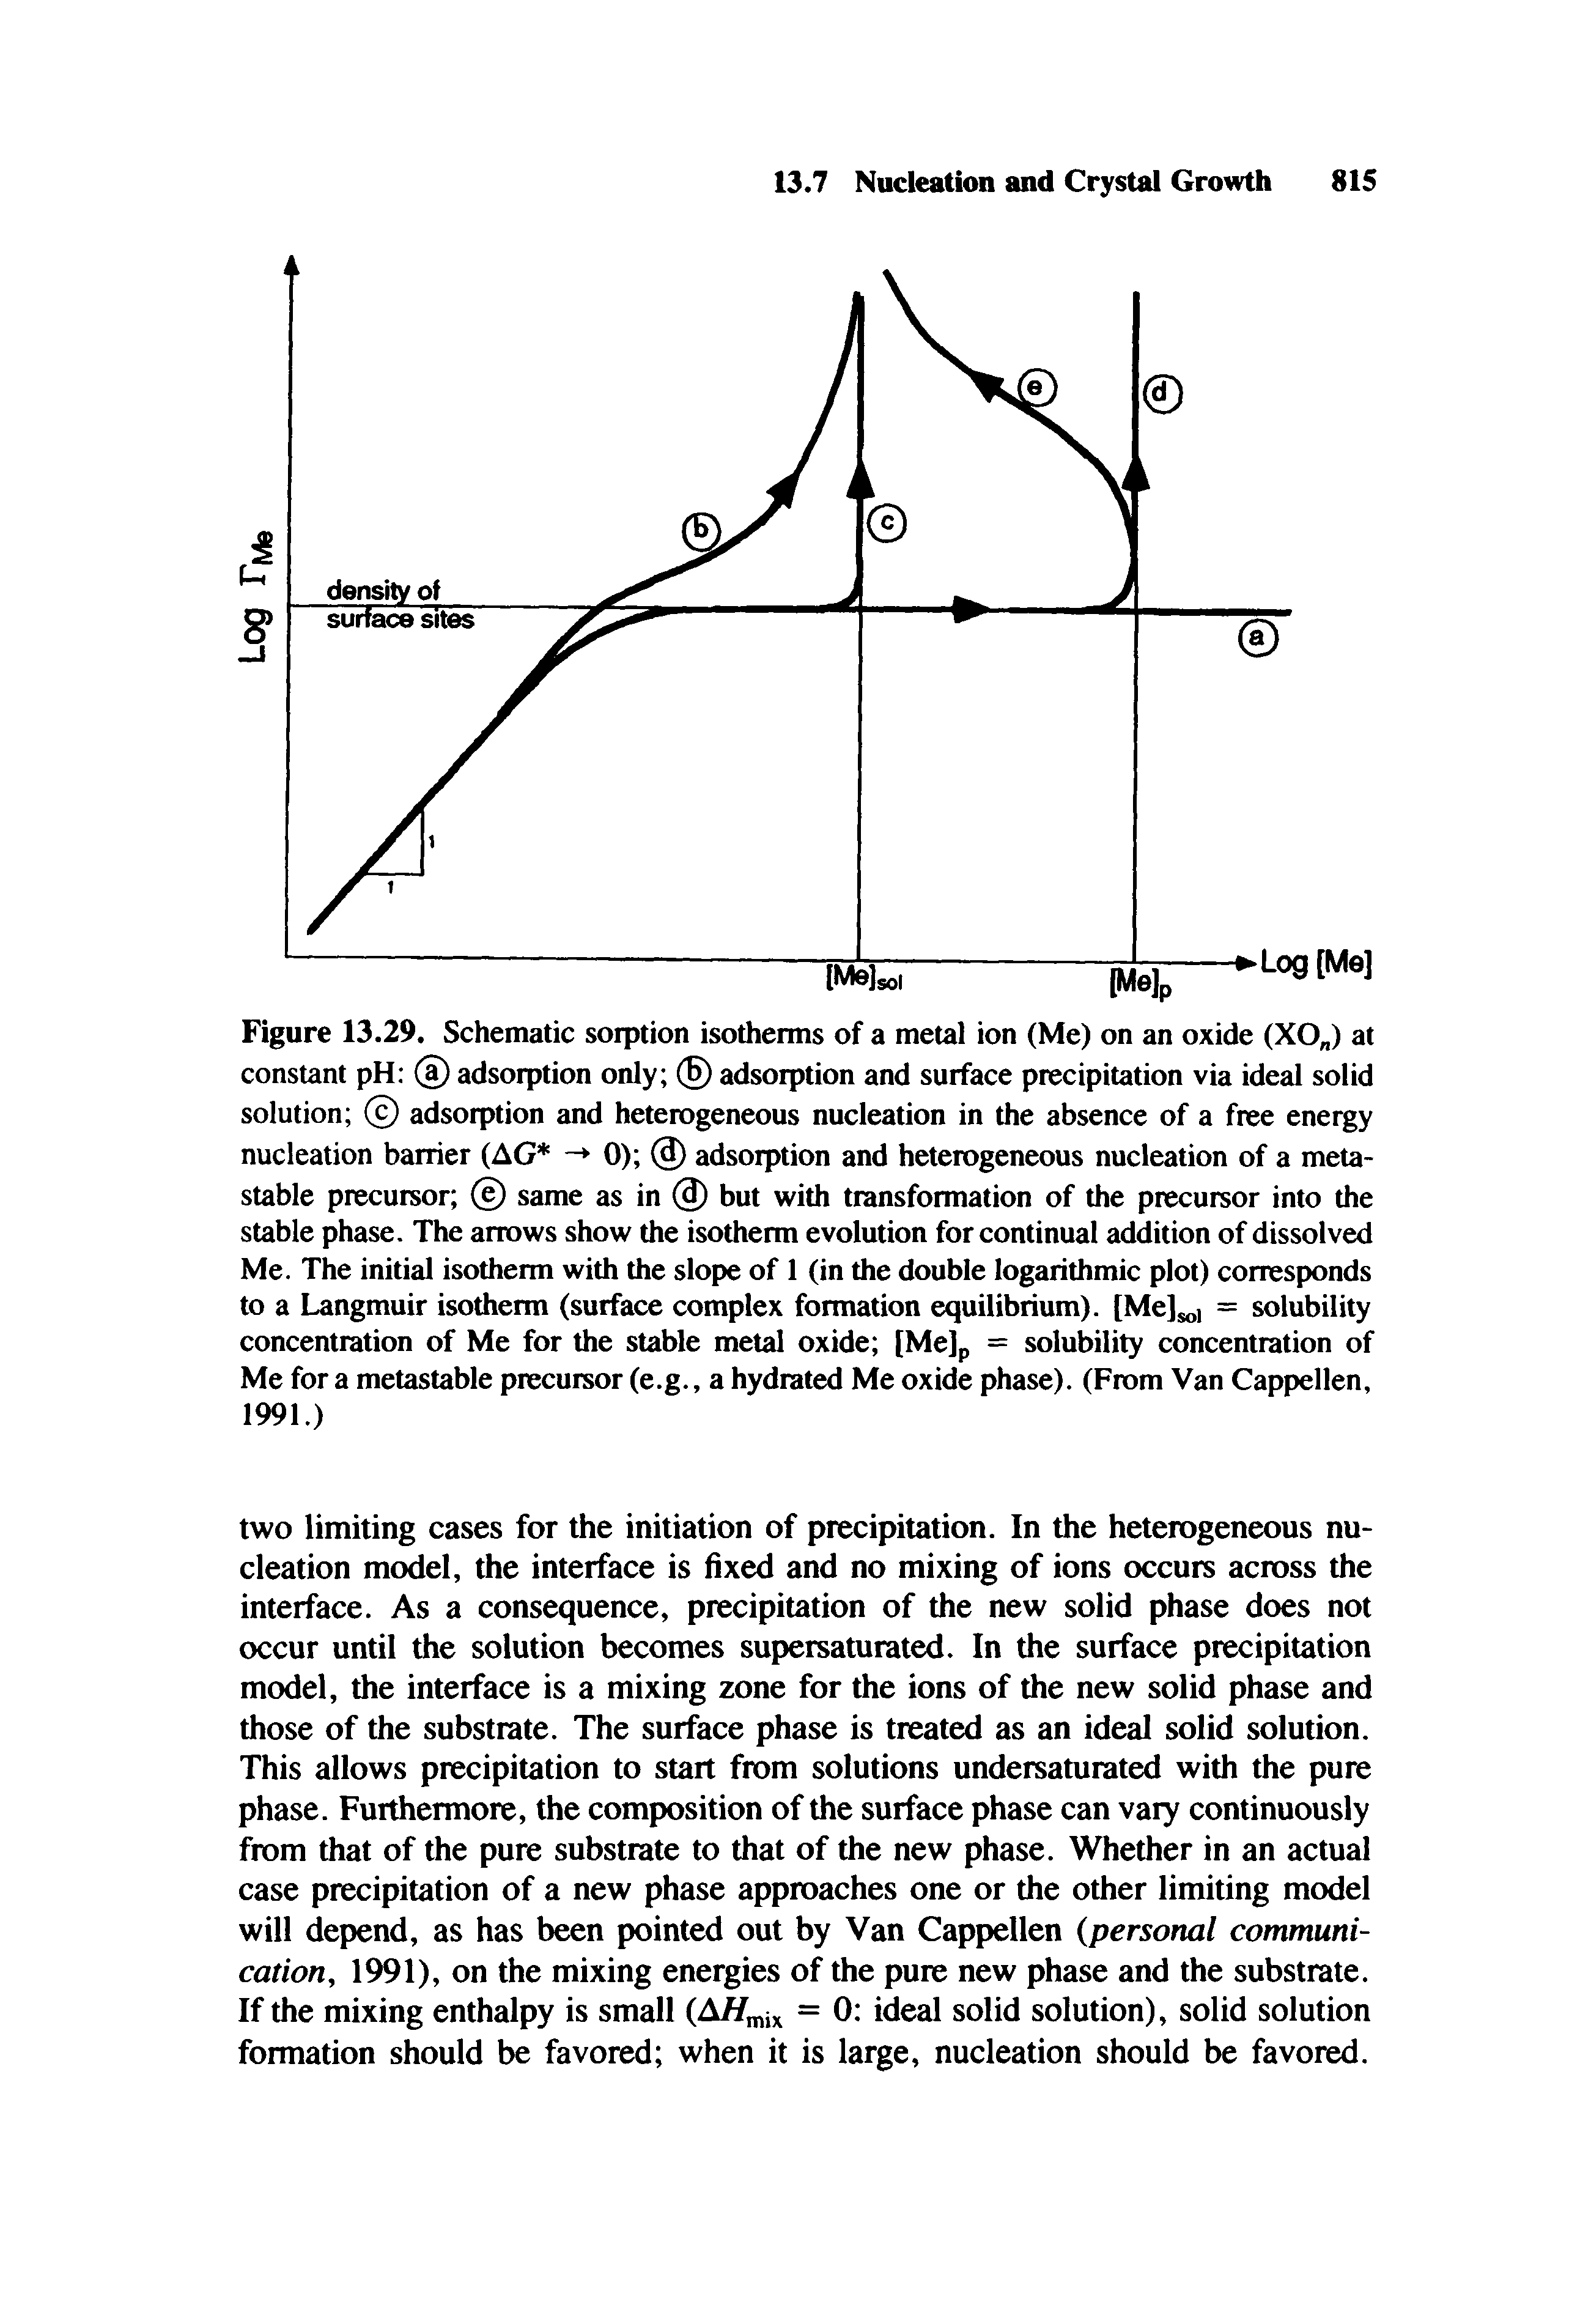 Figure 13.29. Schematic sorption isotherms of a metal ion (Me) on an oxide (XO ) at constant pH (a) adsorption only (H) adsorption and surface precipitation via ideal solid solution (c) adsorption and heterogeneous nucleation in the absence of a free energy nucleation barrier (AG 0) adsorption and heterogeneous nucleation of a metastable precursor (e) same as in (3) but with transformation of the precursor into the stable phase. The arrows show the isotherm evolution for continual addition of dissolved Me. The initial isotherm with the slope of 1 (in the double logarithmic plot) corresponds to a Langmuir isotherm (surface complex formation equilibrium). [Me]s , = solubility concentration of Me for the stable metal oxide [Me]p = solubility concentration of Me for a metastable precursor (e.g., a hydrated Me oxide phase). (From Van Cappellen, 1991.)...